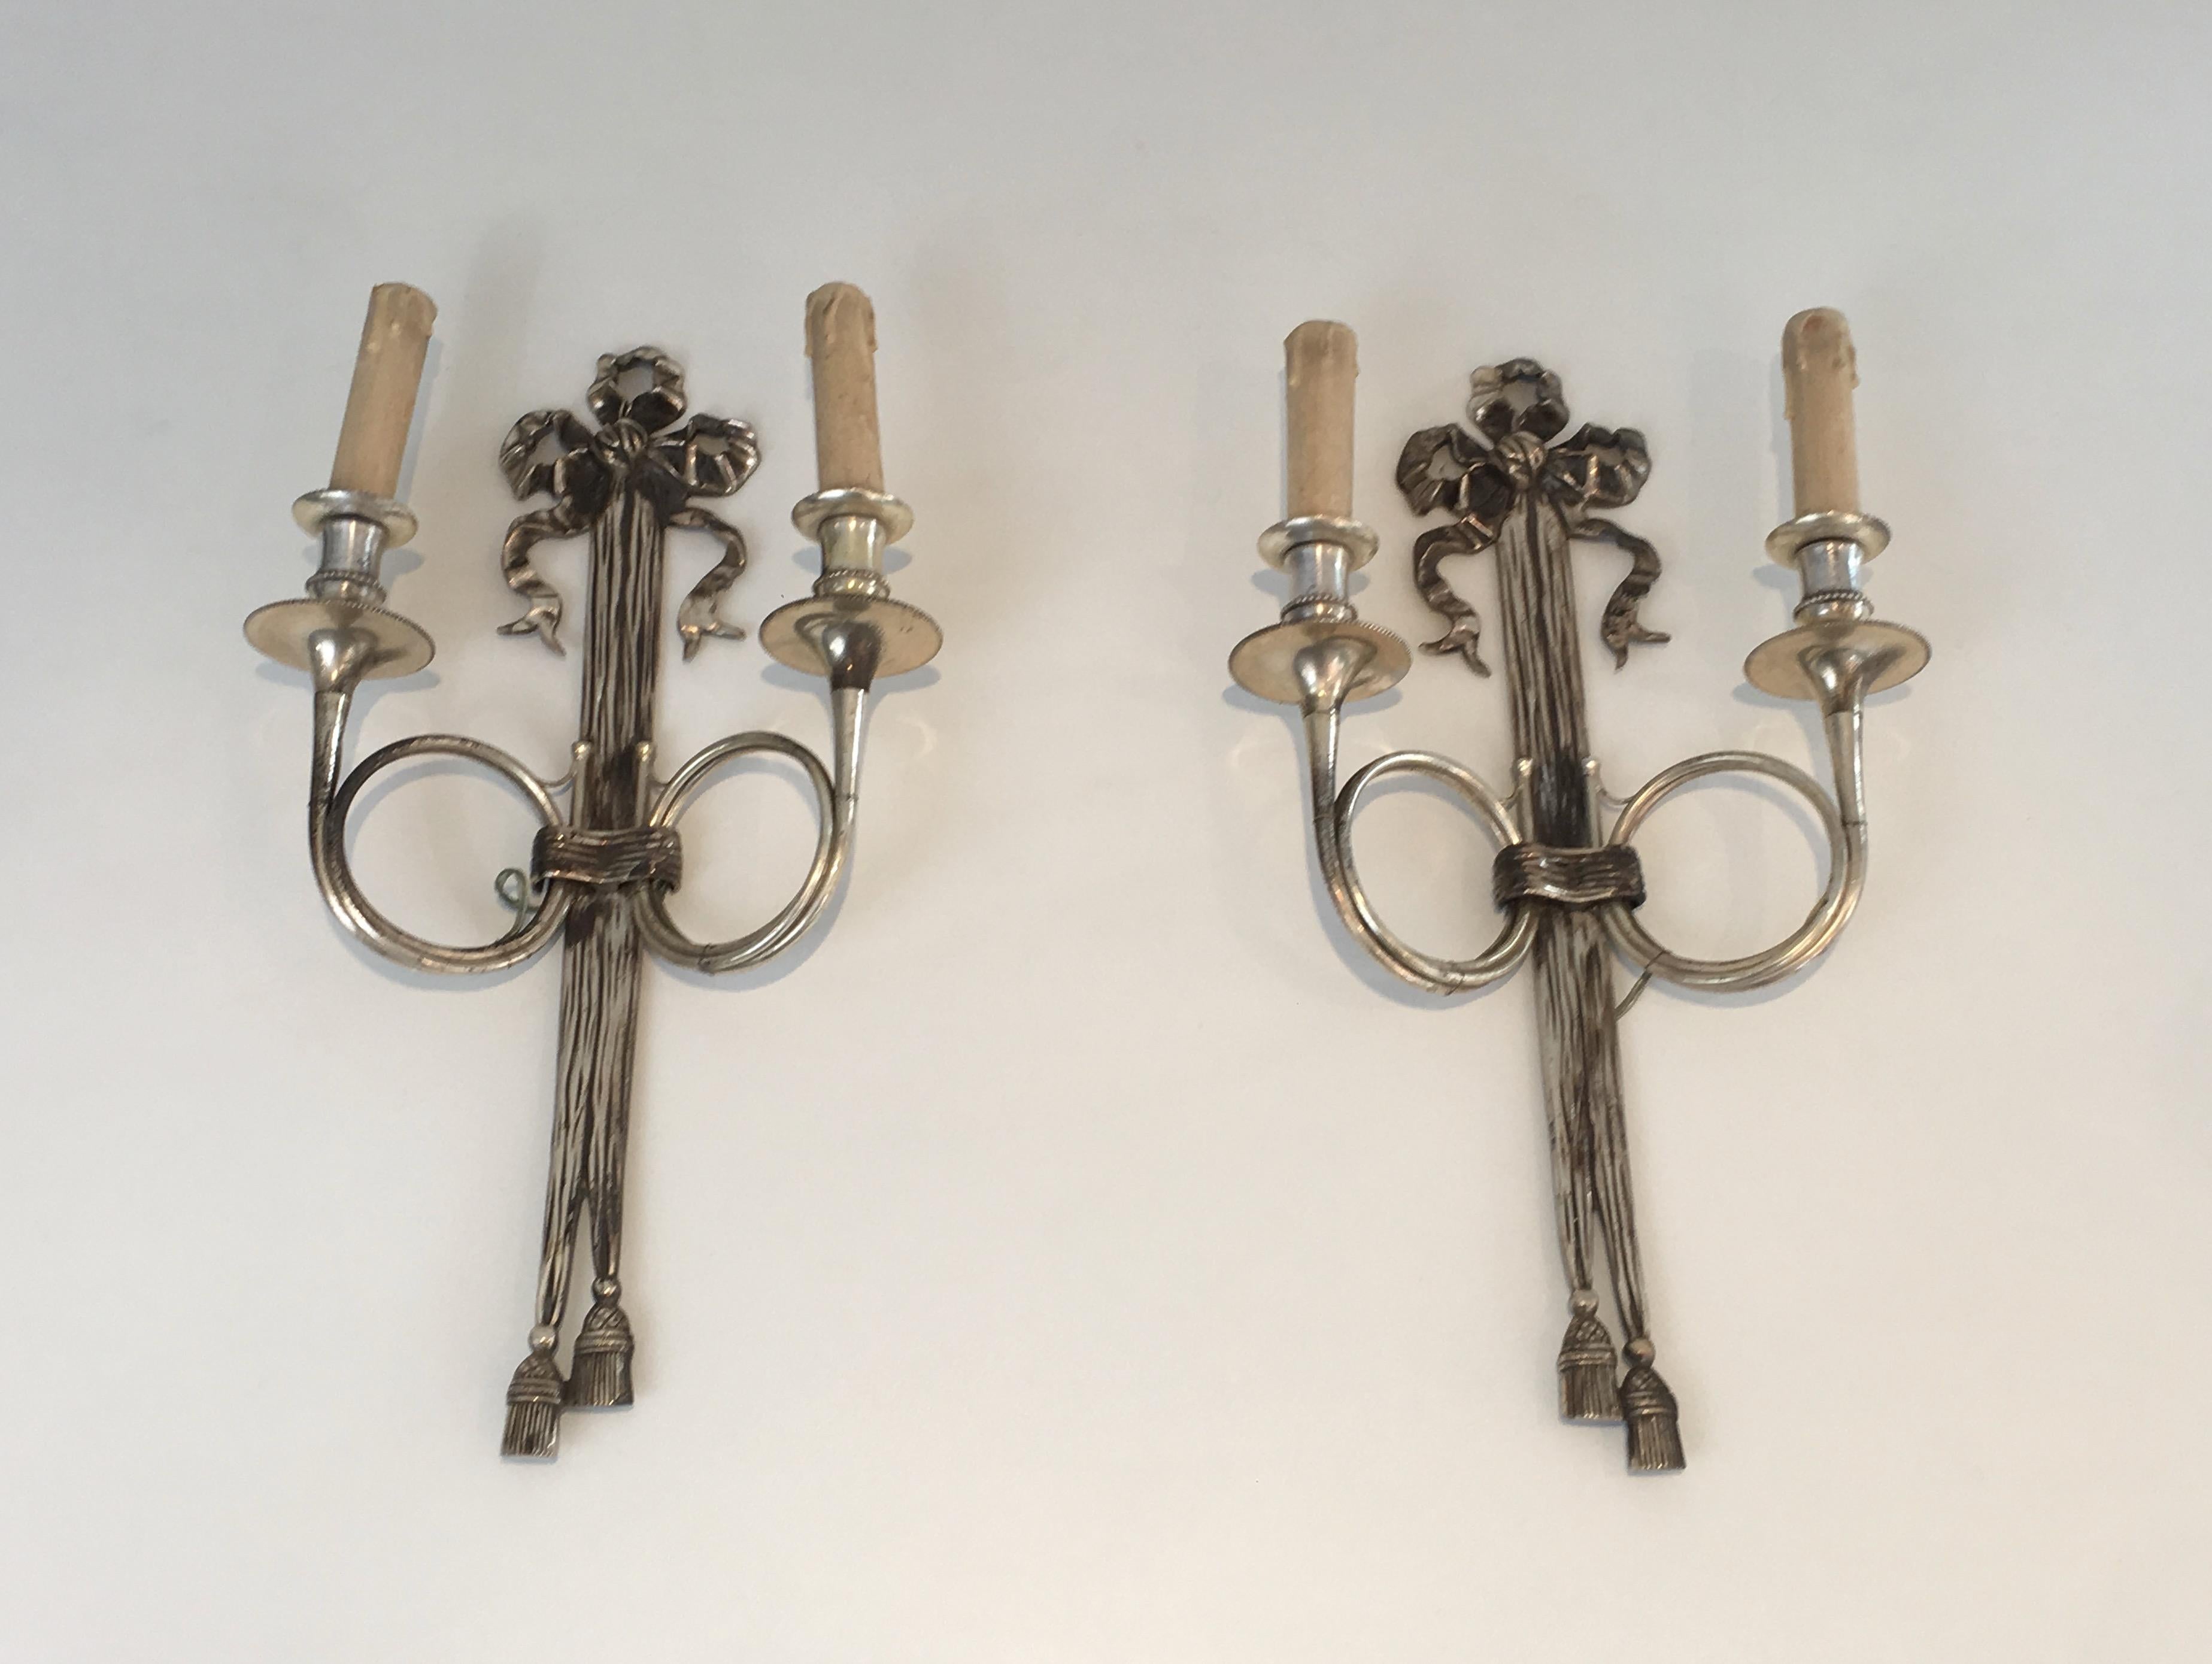 This very nice pair of neoclassical style wall sconces is made of silvered bronze. These wall lights are very decorative with their ribbon and hunting horns. These sconces were made by famous French designer Maison Baguès, circa 1960.